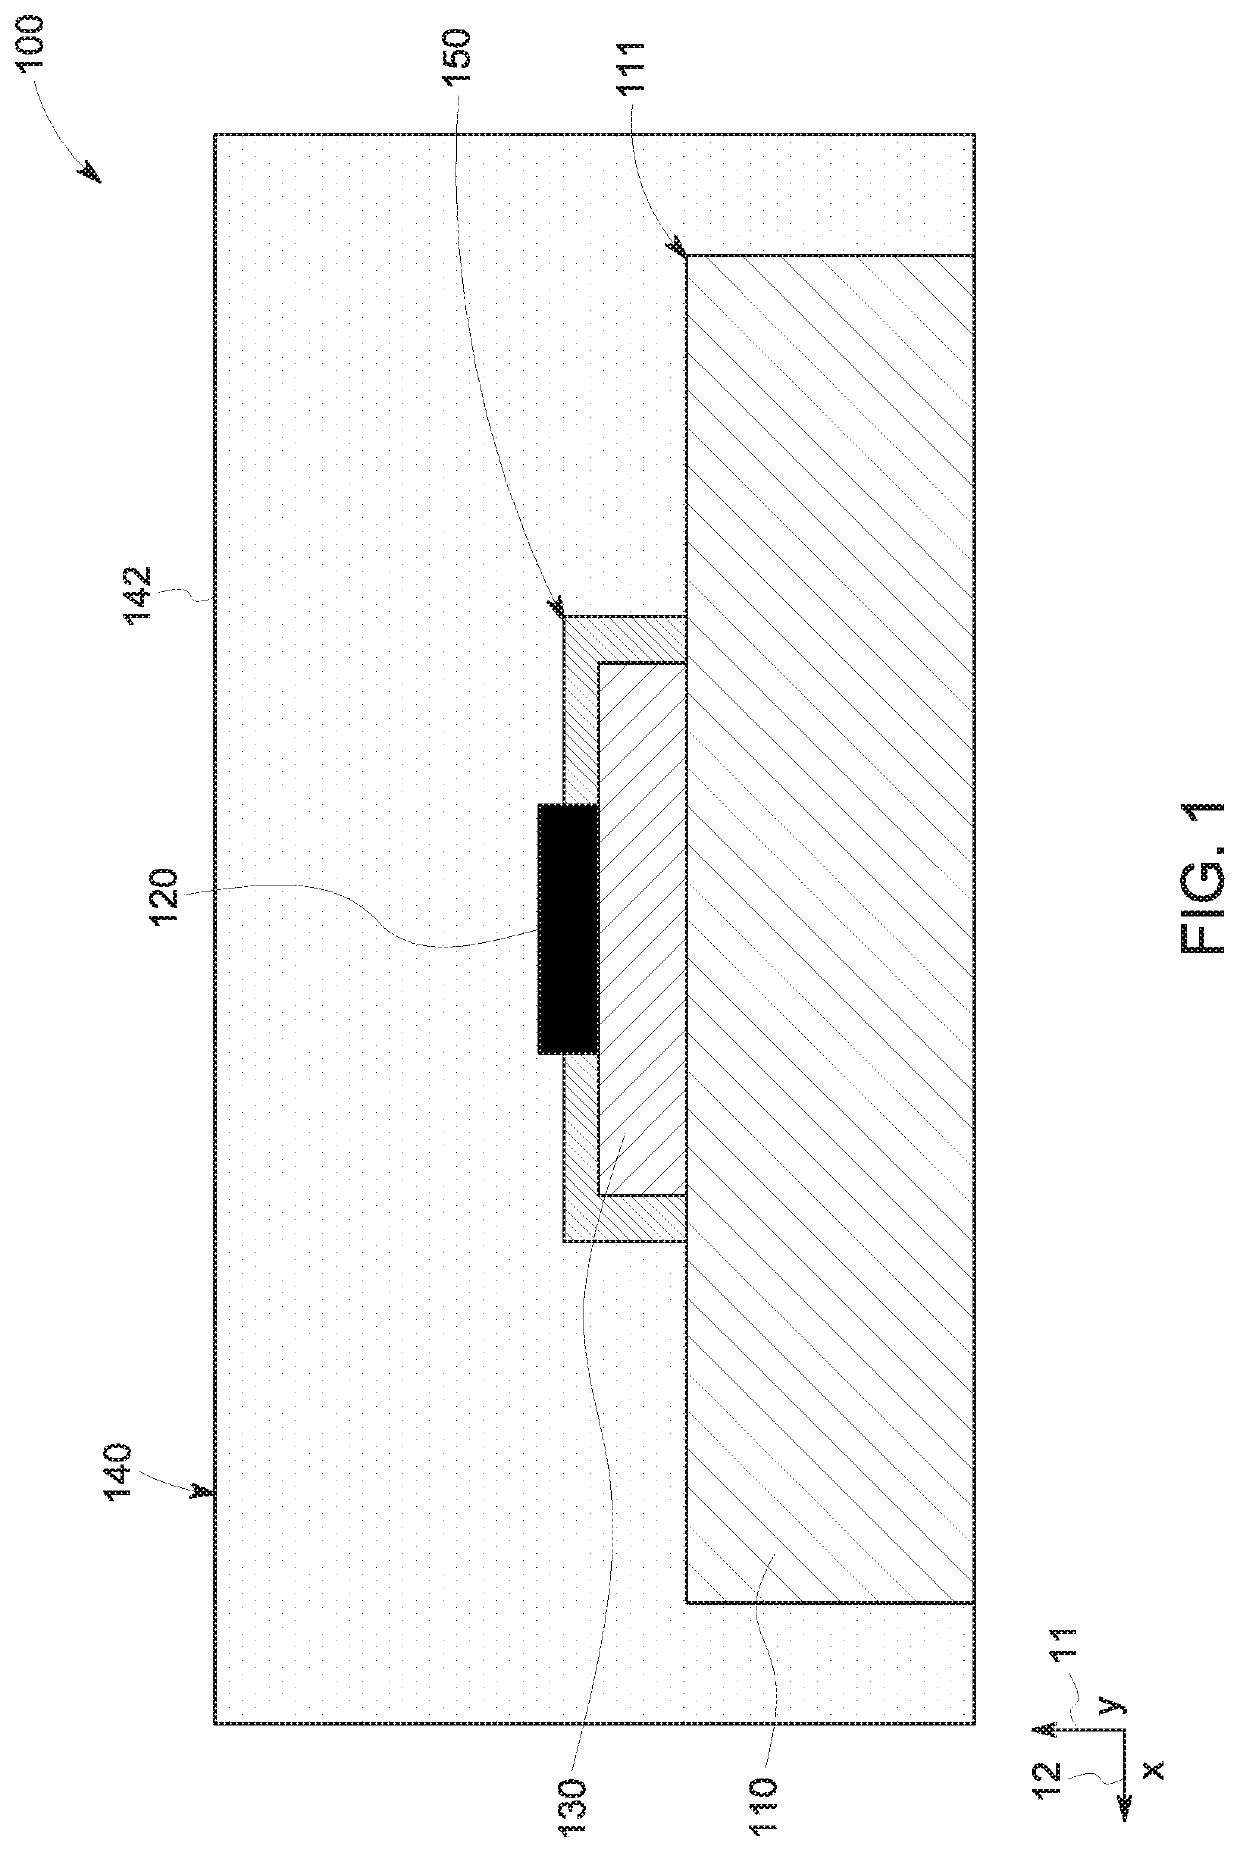 Insulation systems and methods of depositing insulation systems